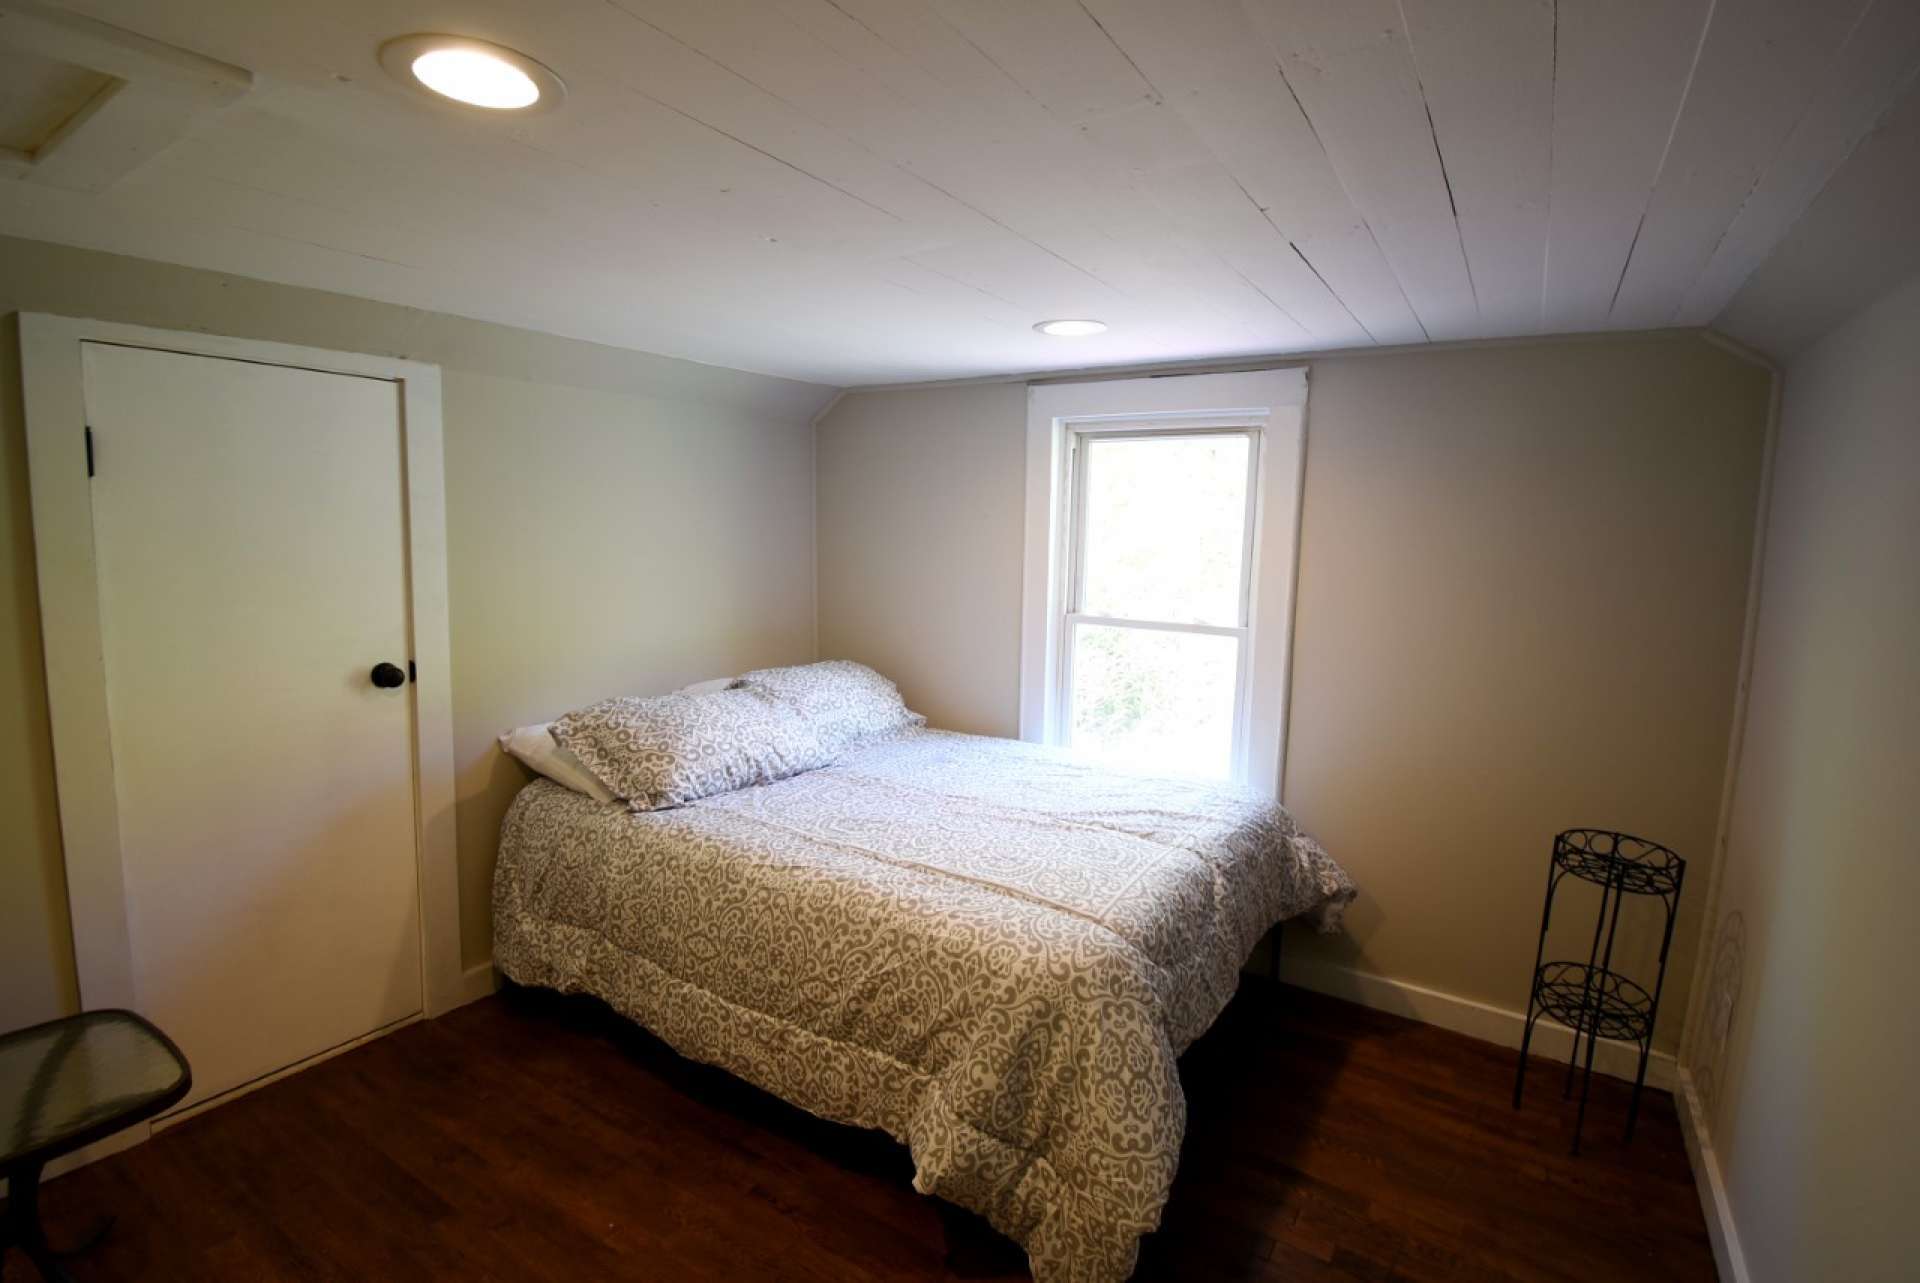 This is the guest bedroom.  As with most homes built in this time period, some areas have ceilings height below 7' and are counted in the square footage.